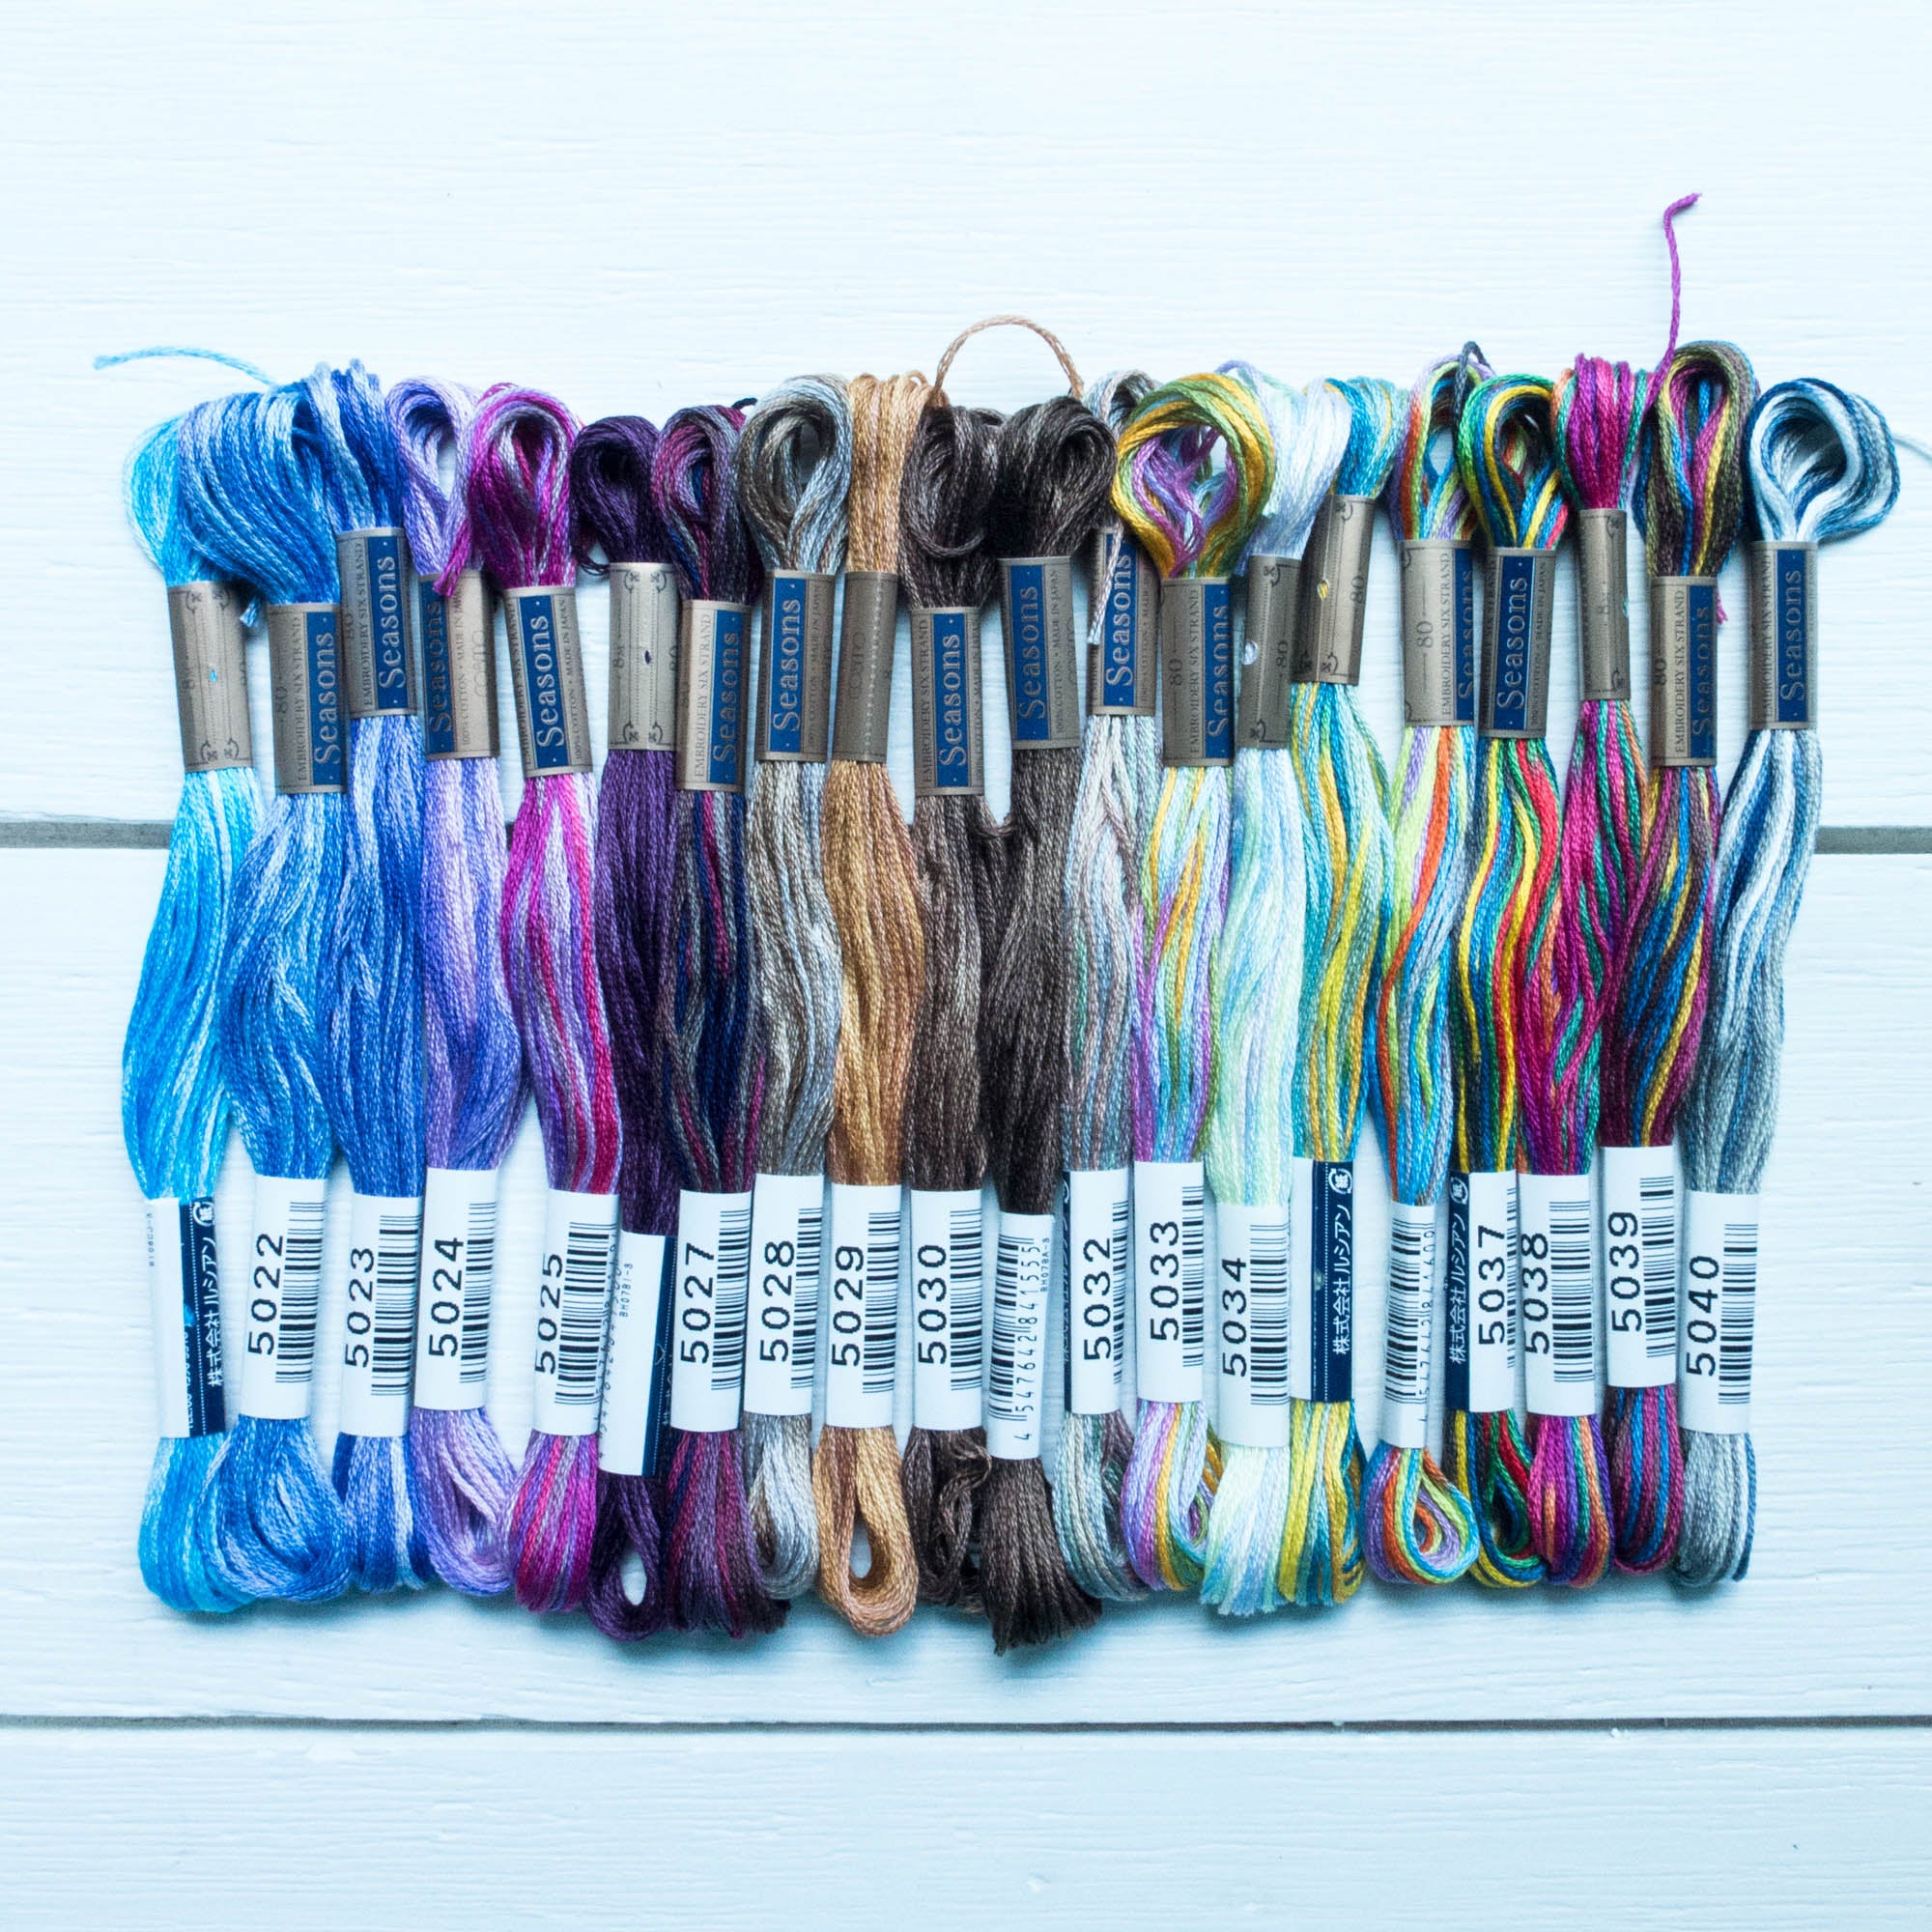 Lecien Cosmo Seasons 5000 Variegated Embroidery Thread 5035